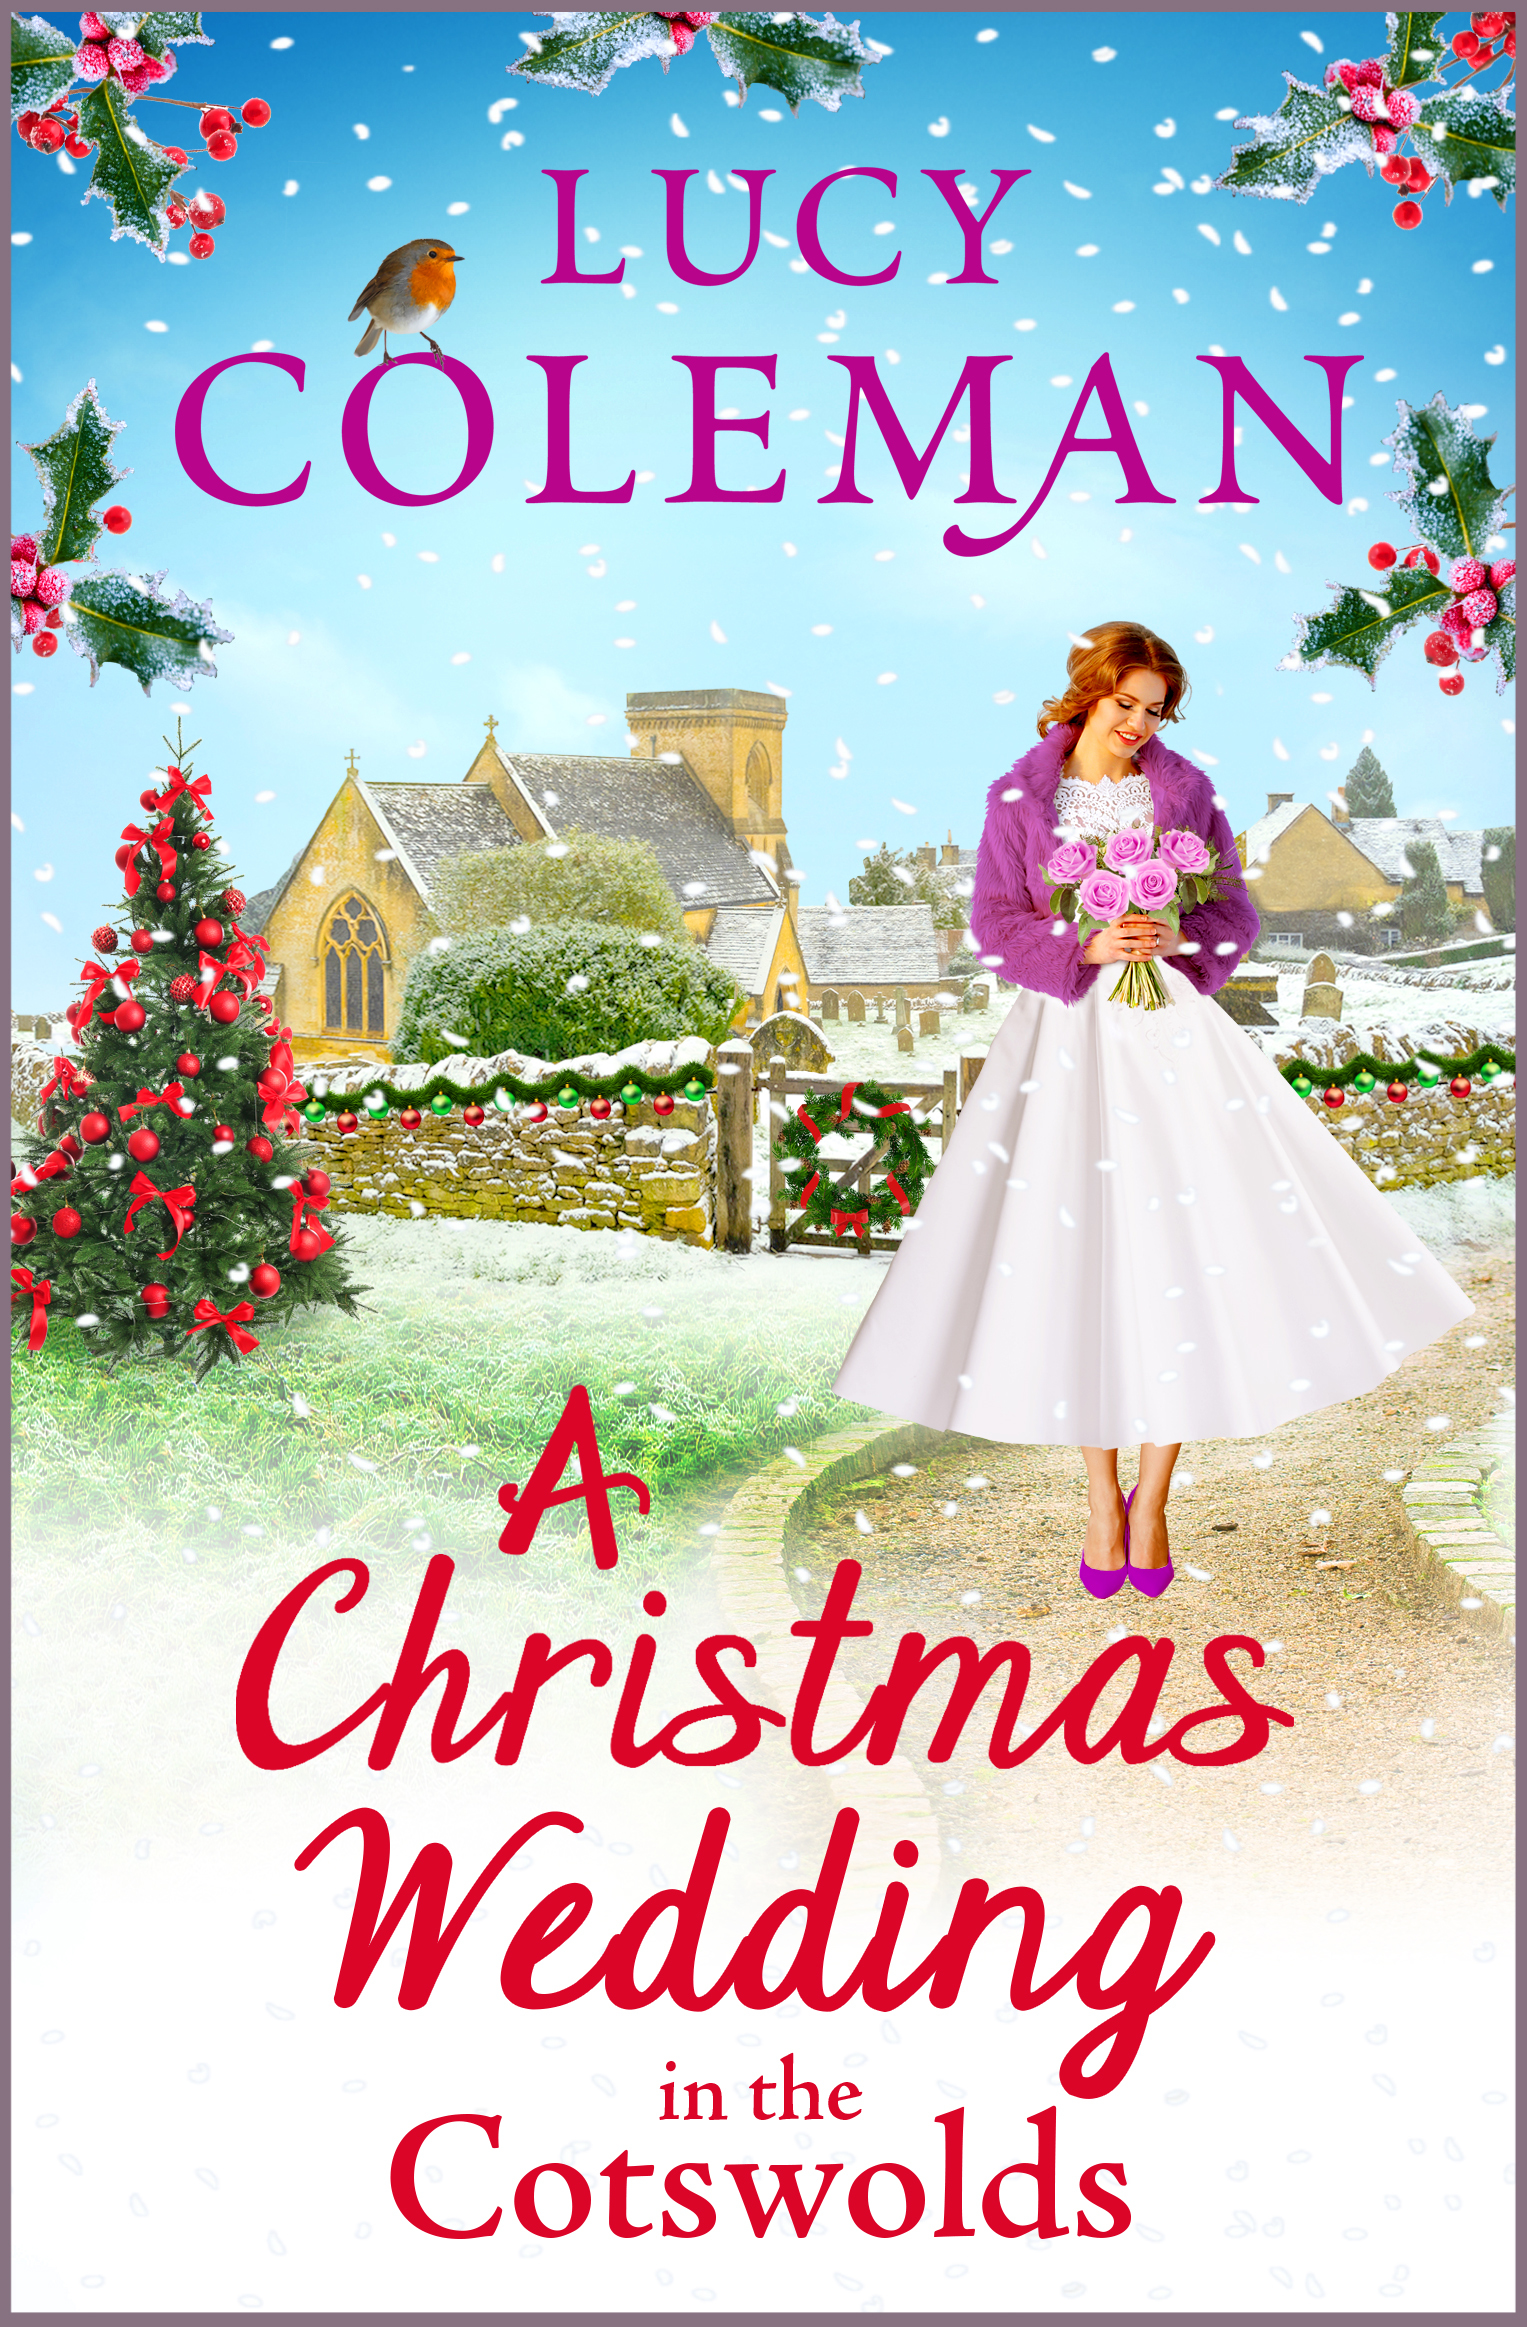 A Christmas Wedding in the Cotswolds